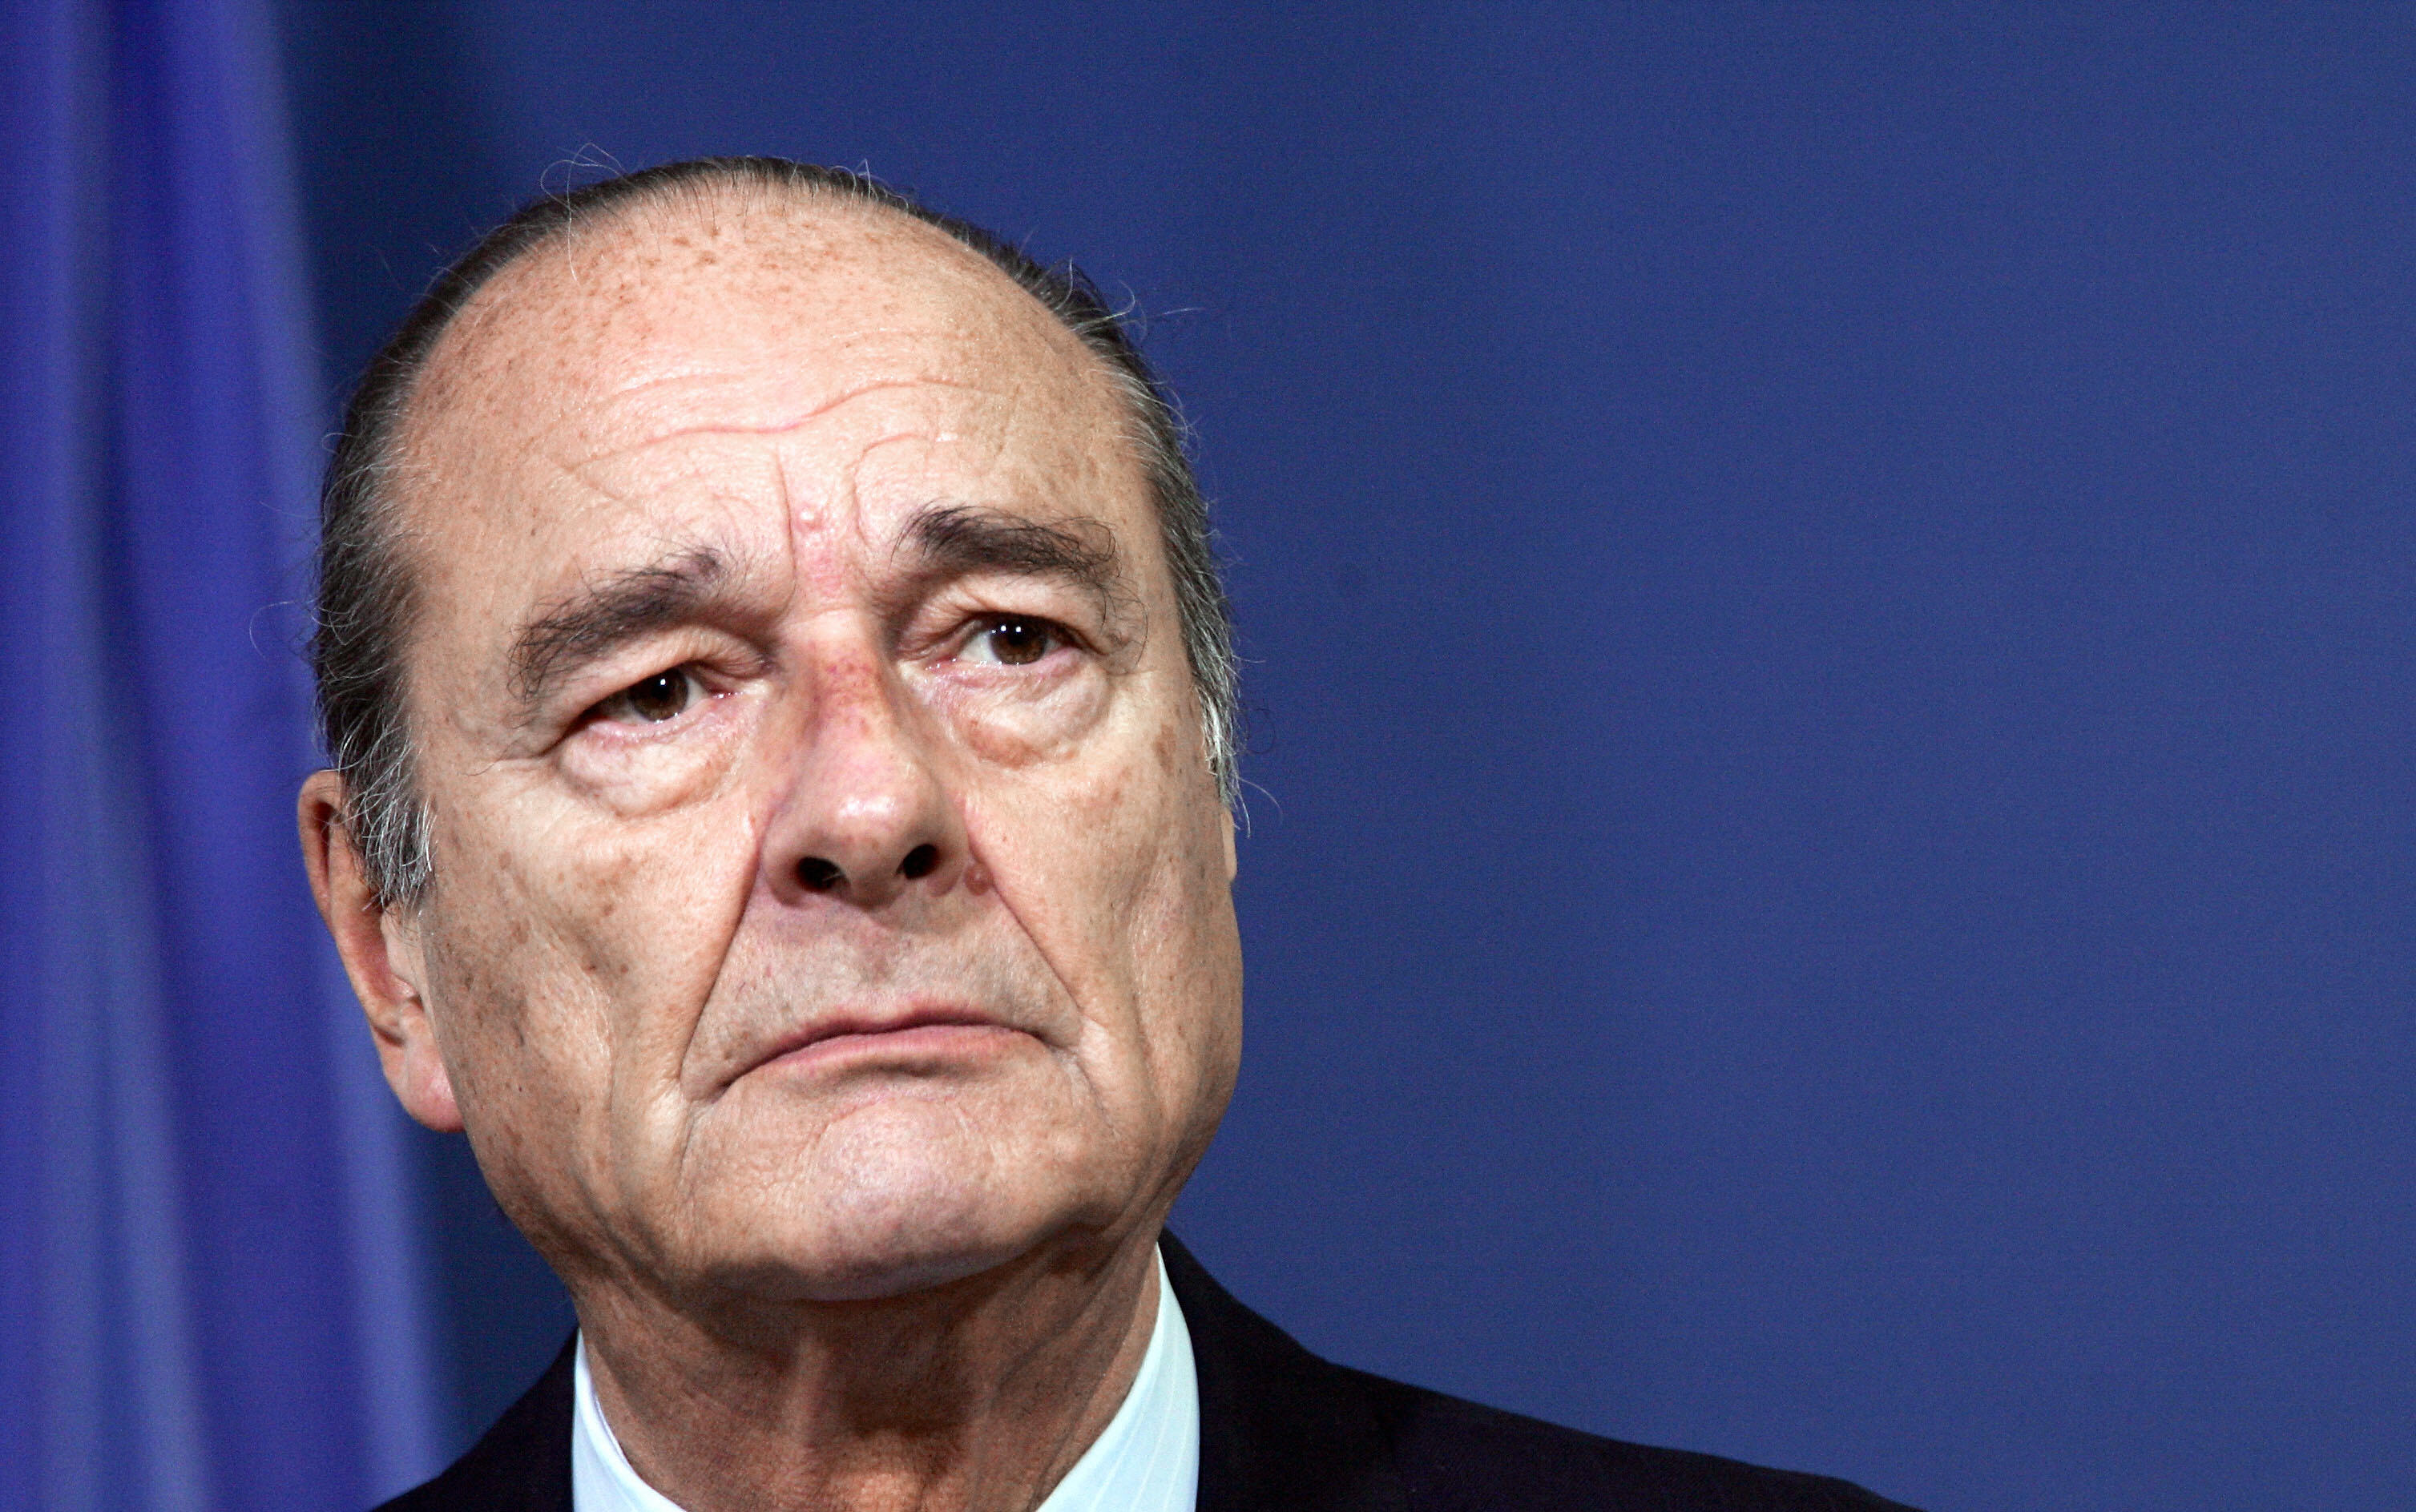 Bayonne, FRANCE: French President Jacques Chirac delivers a speech, 03 April 2007 in the southern town of Bayonne, during his last visit to French Army's Special Forces Regiment. AFP PHOTO PATRICK KOVARIK (Photo credit should read PATRICK KOVARIK/AFP/Getty Images)